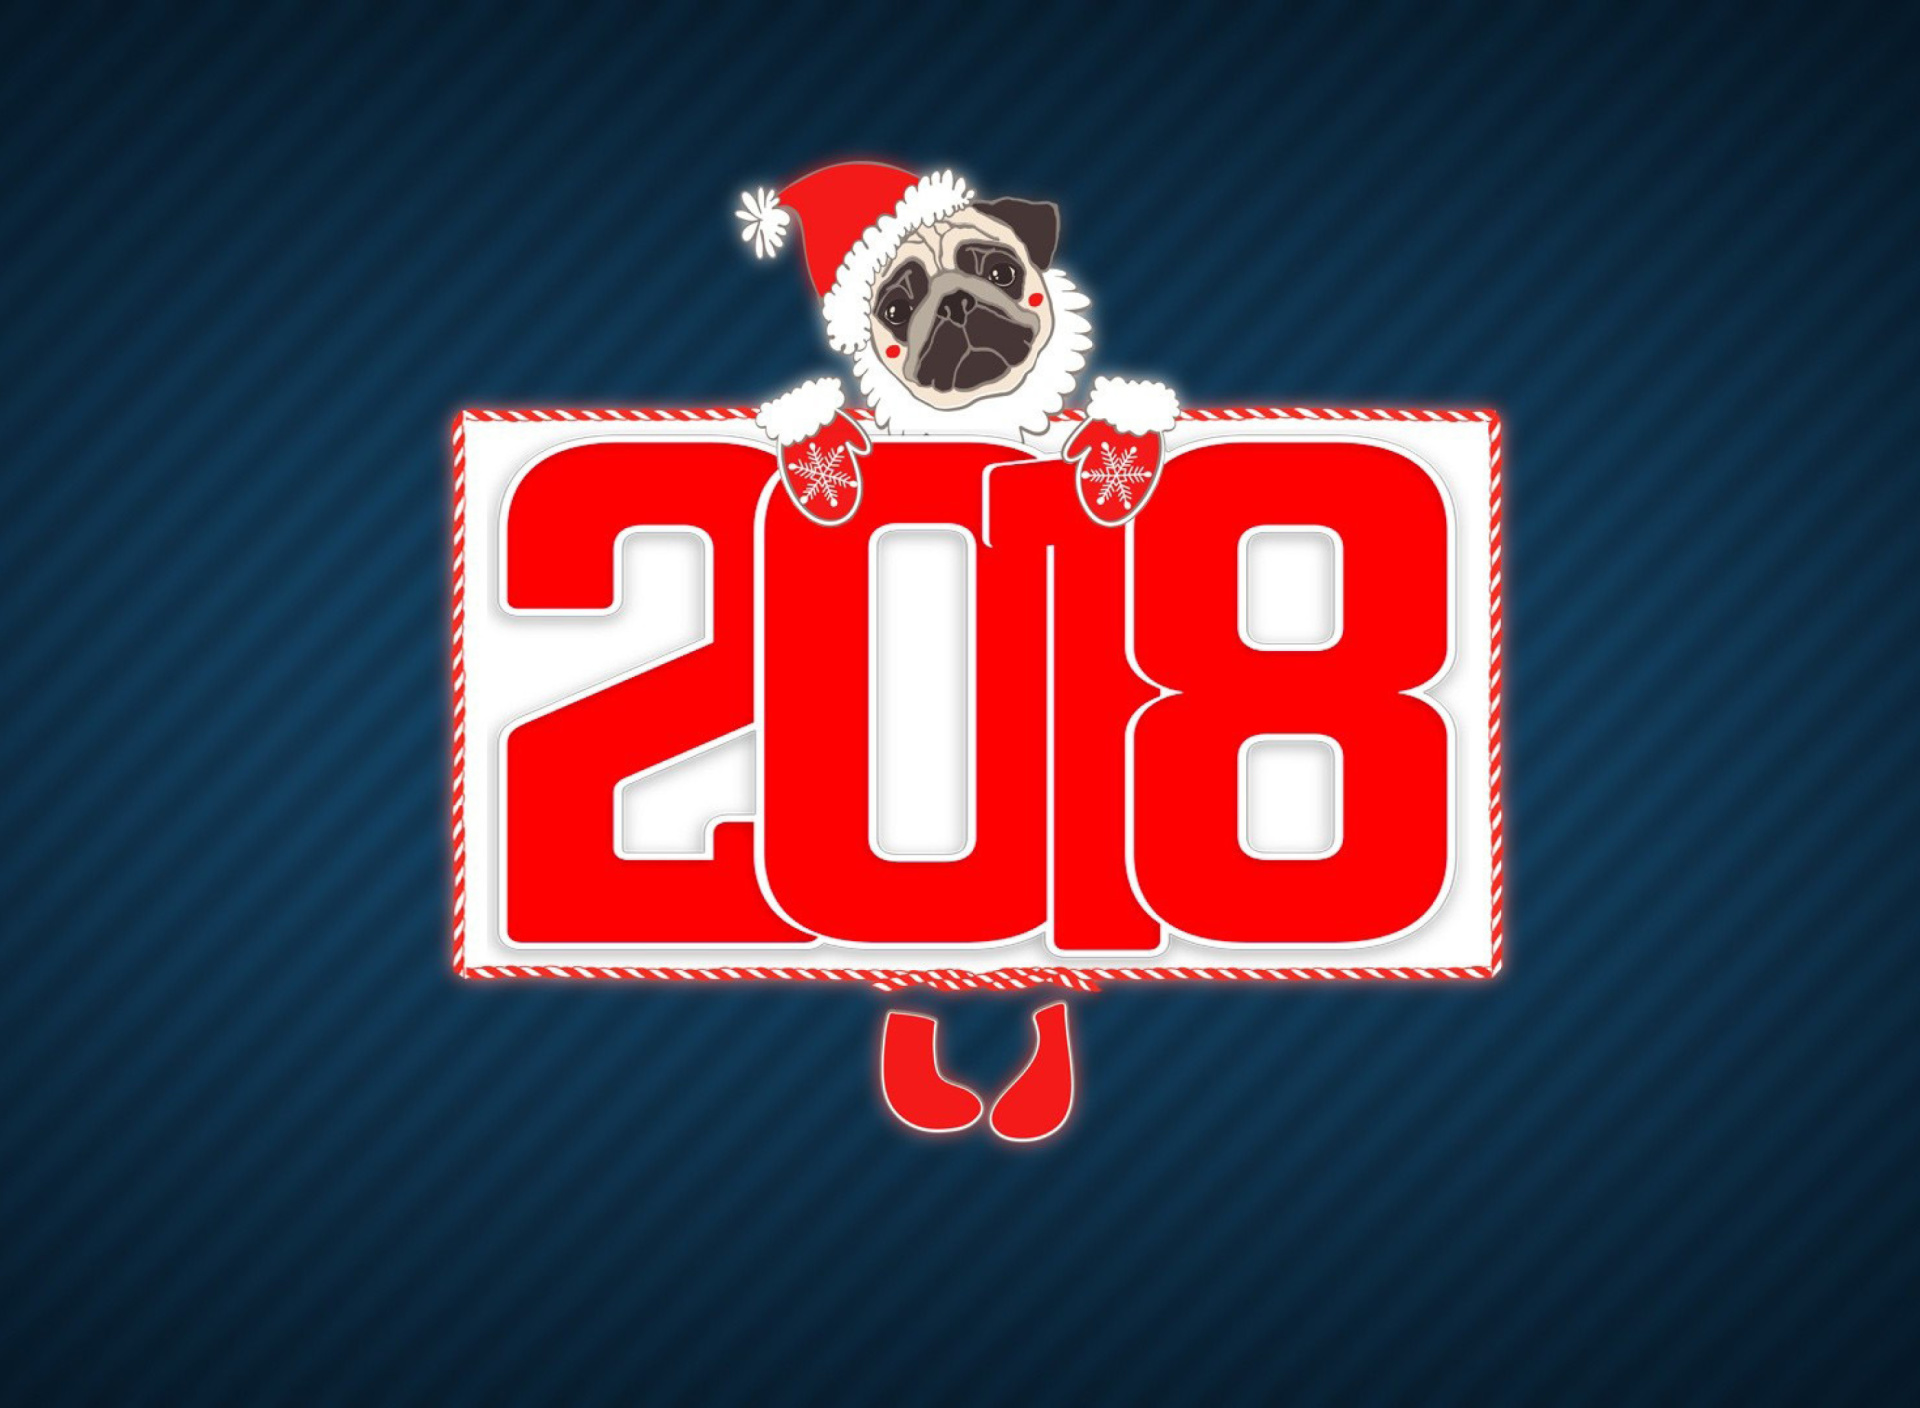 2018 New Year Chinese horoscope year of the Dog wallpaper 1920x1408